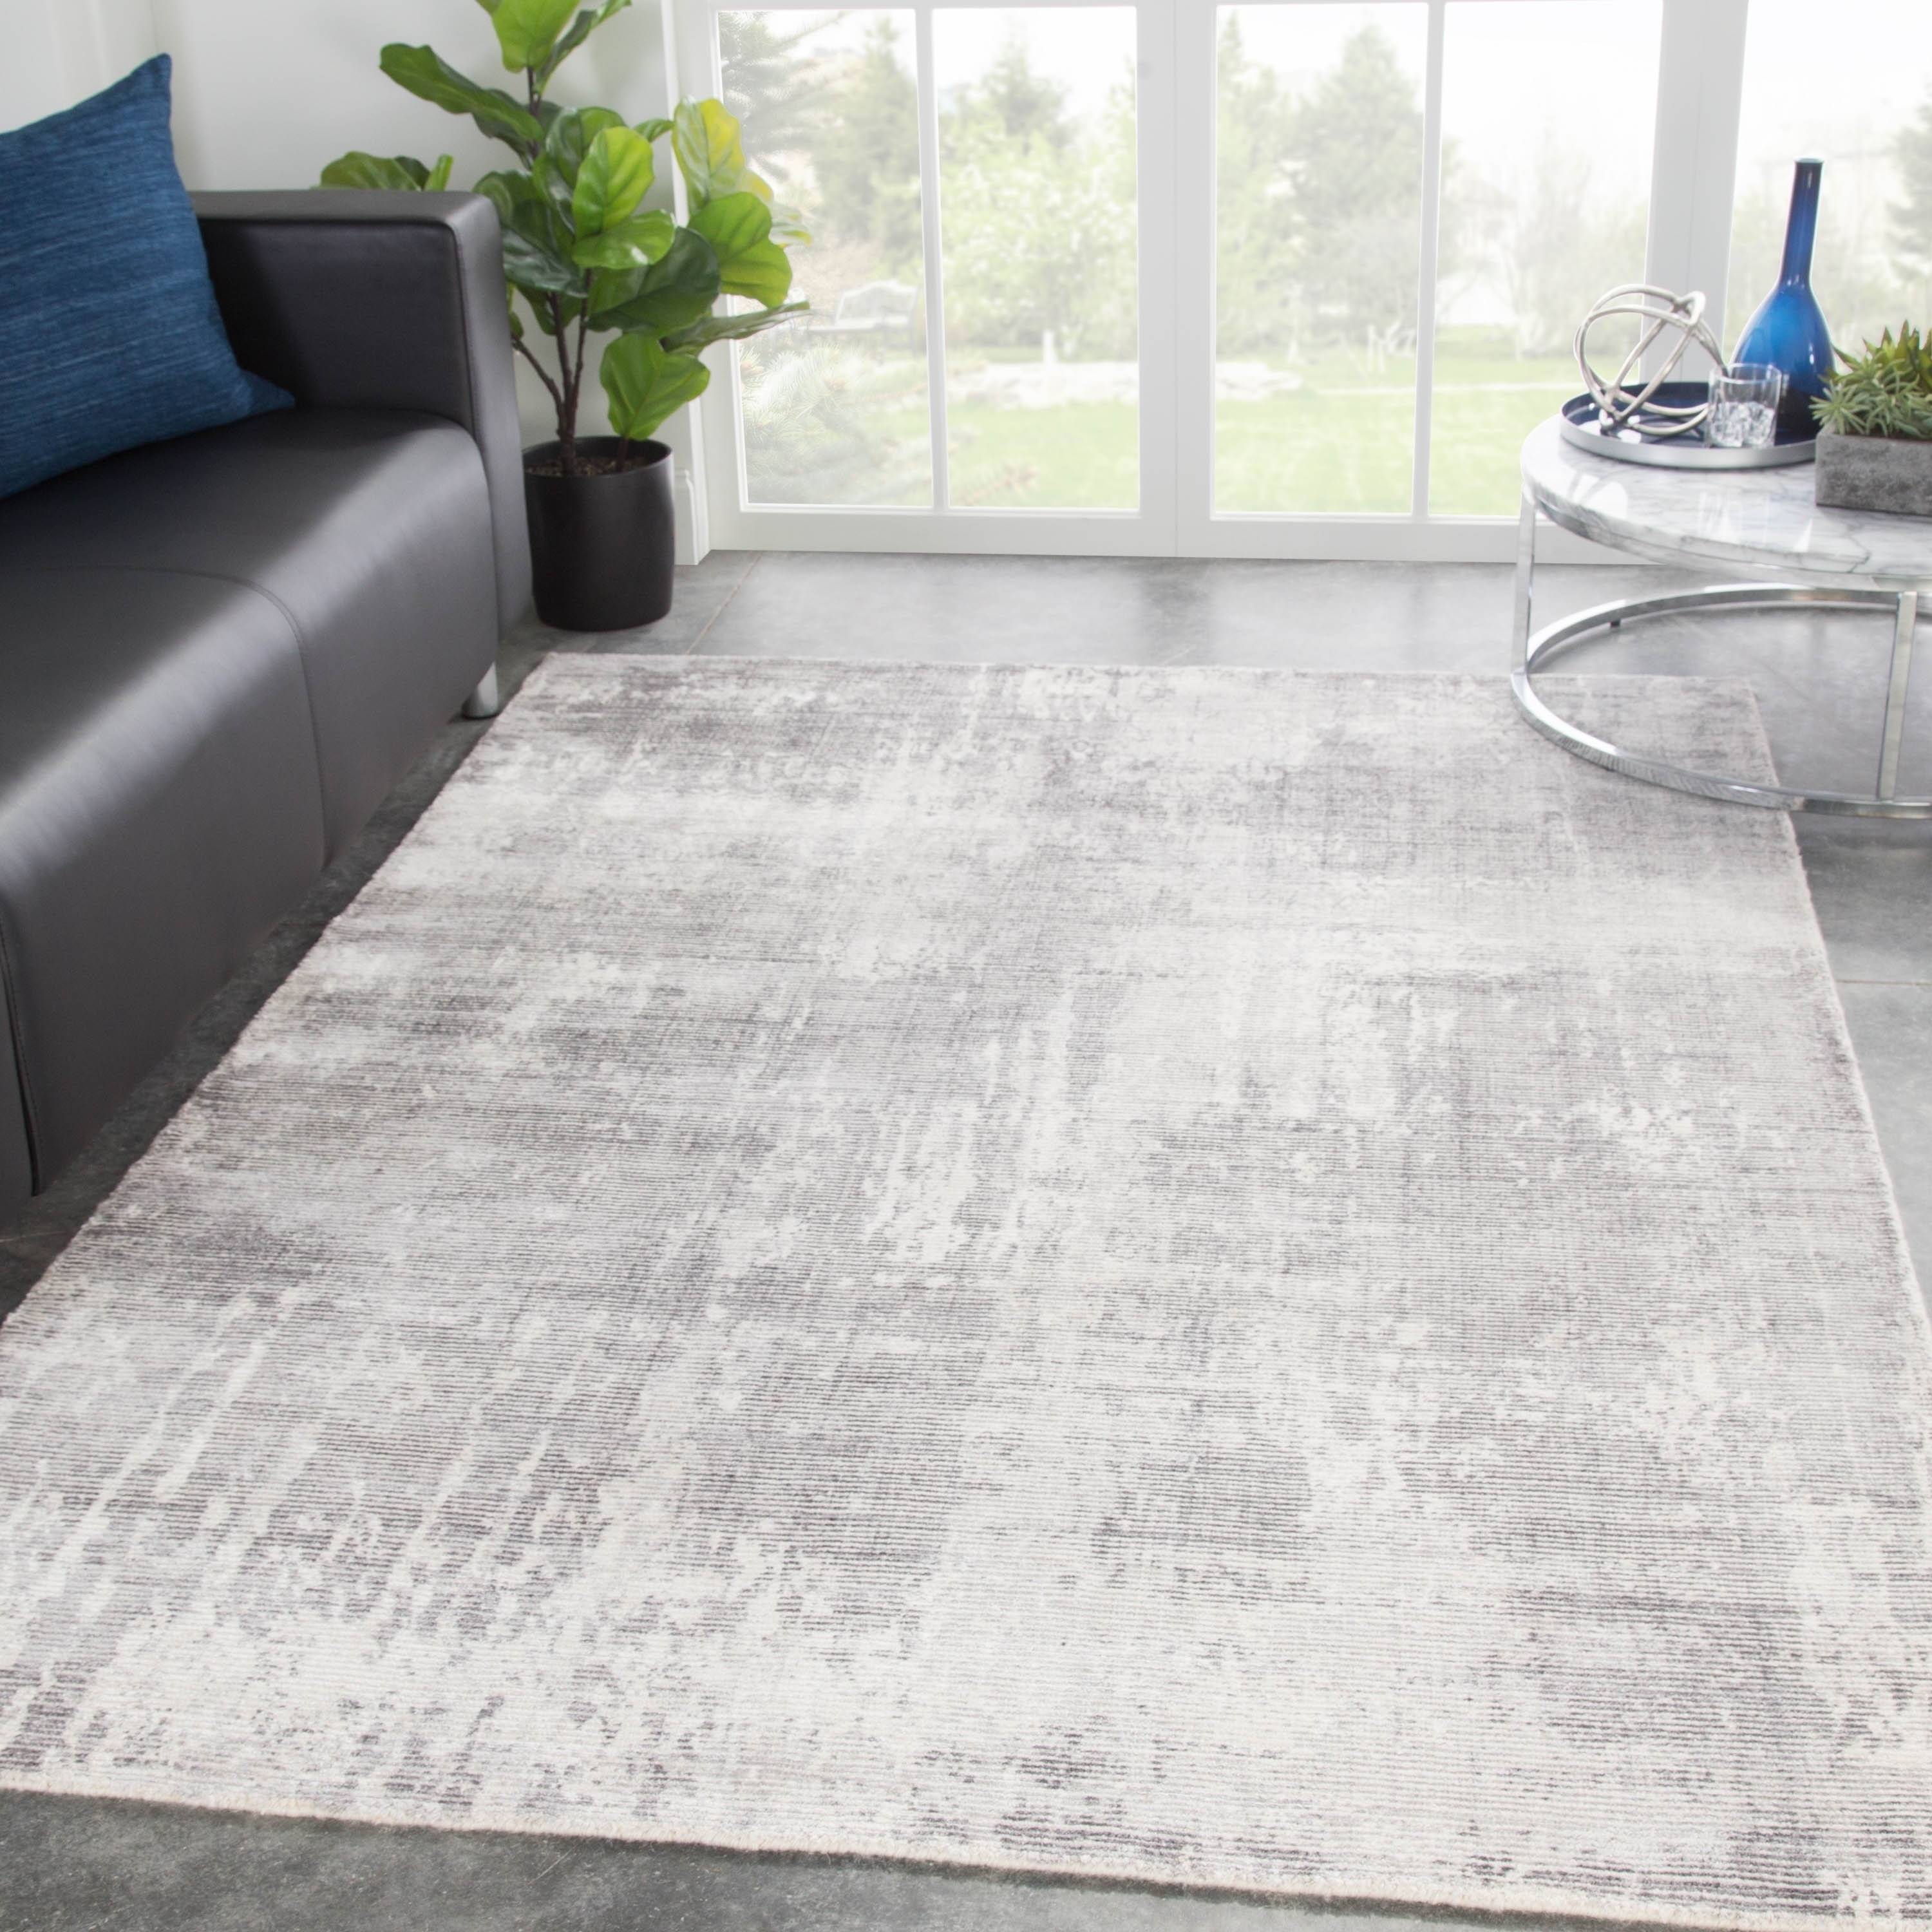 grey and white area rug 8x10